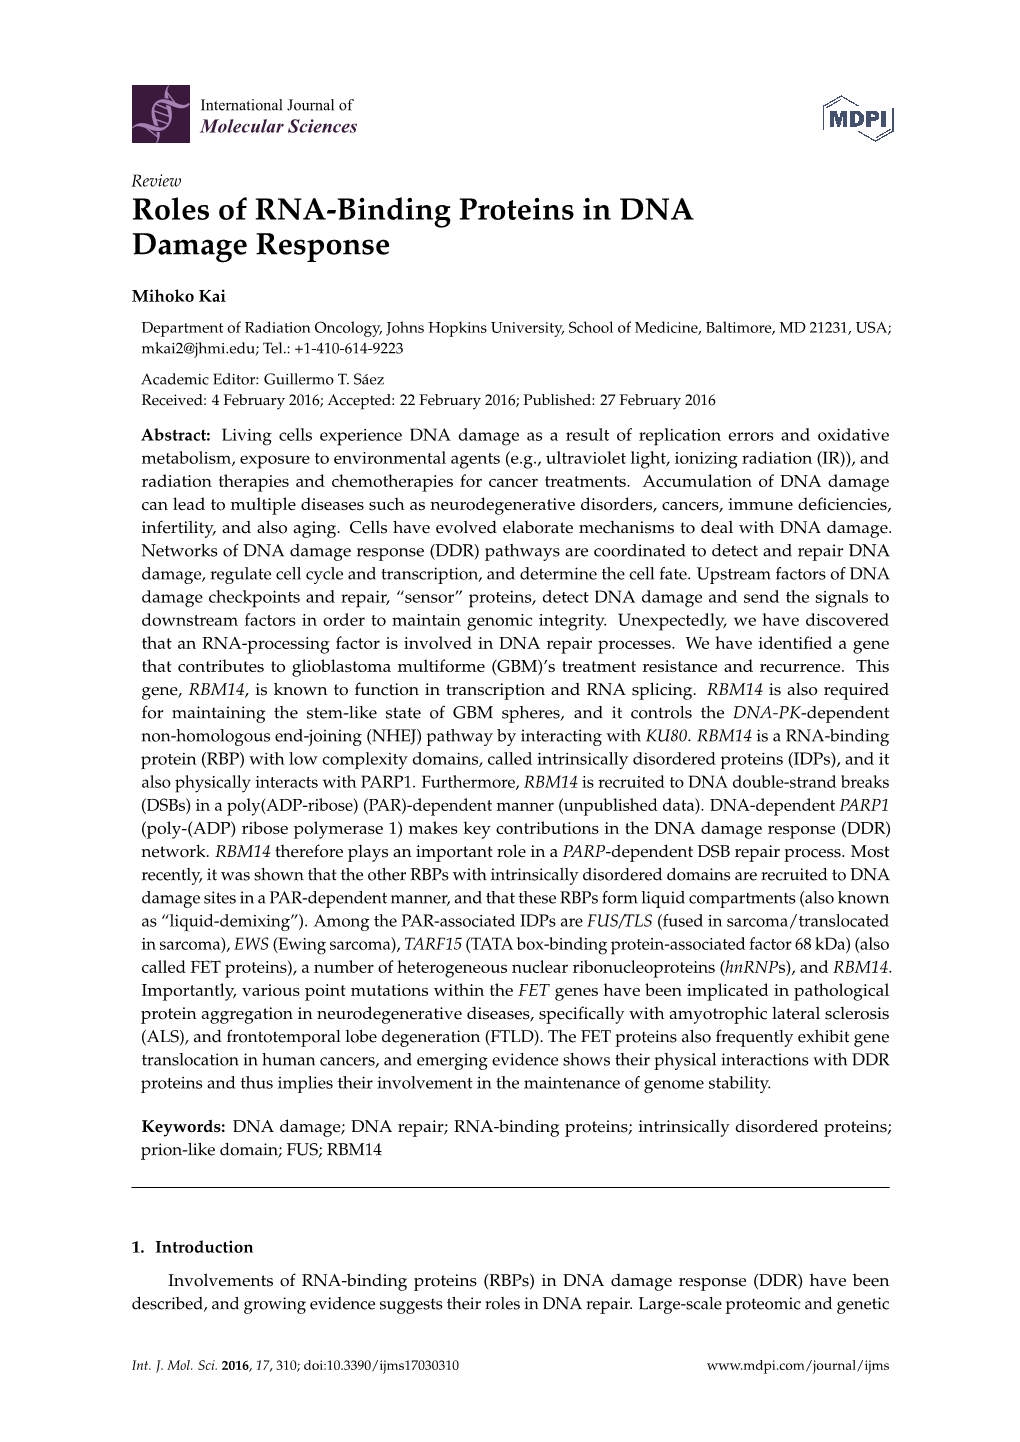 Roles of RNA-Binding Proteins in DNA Damage Response